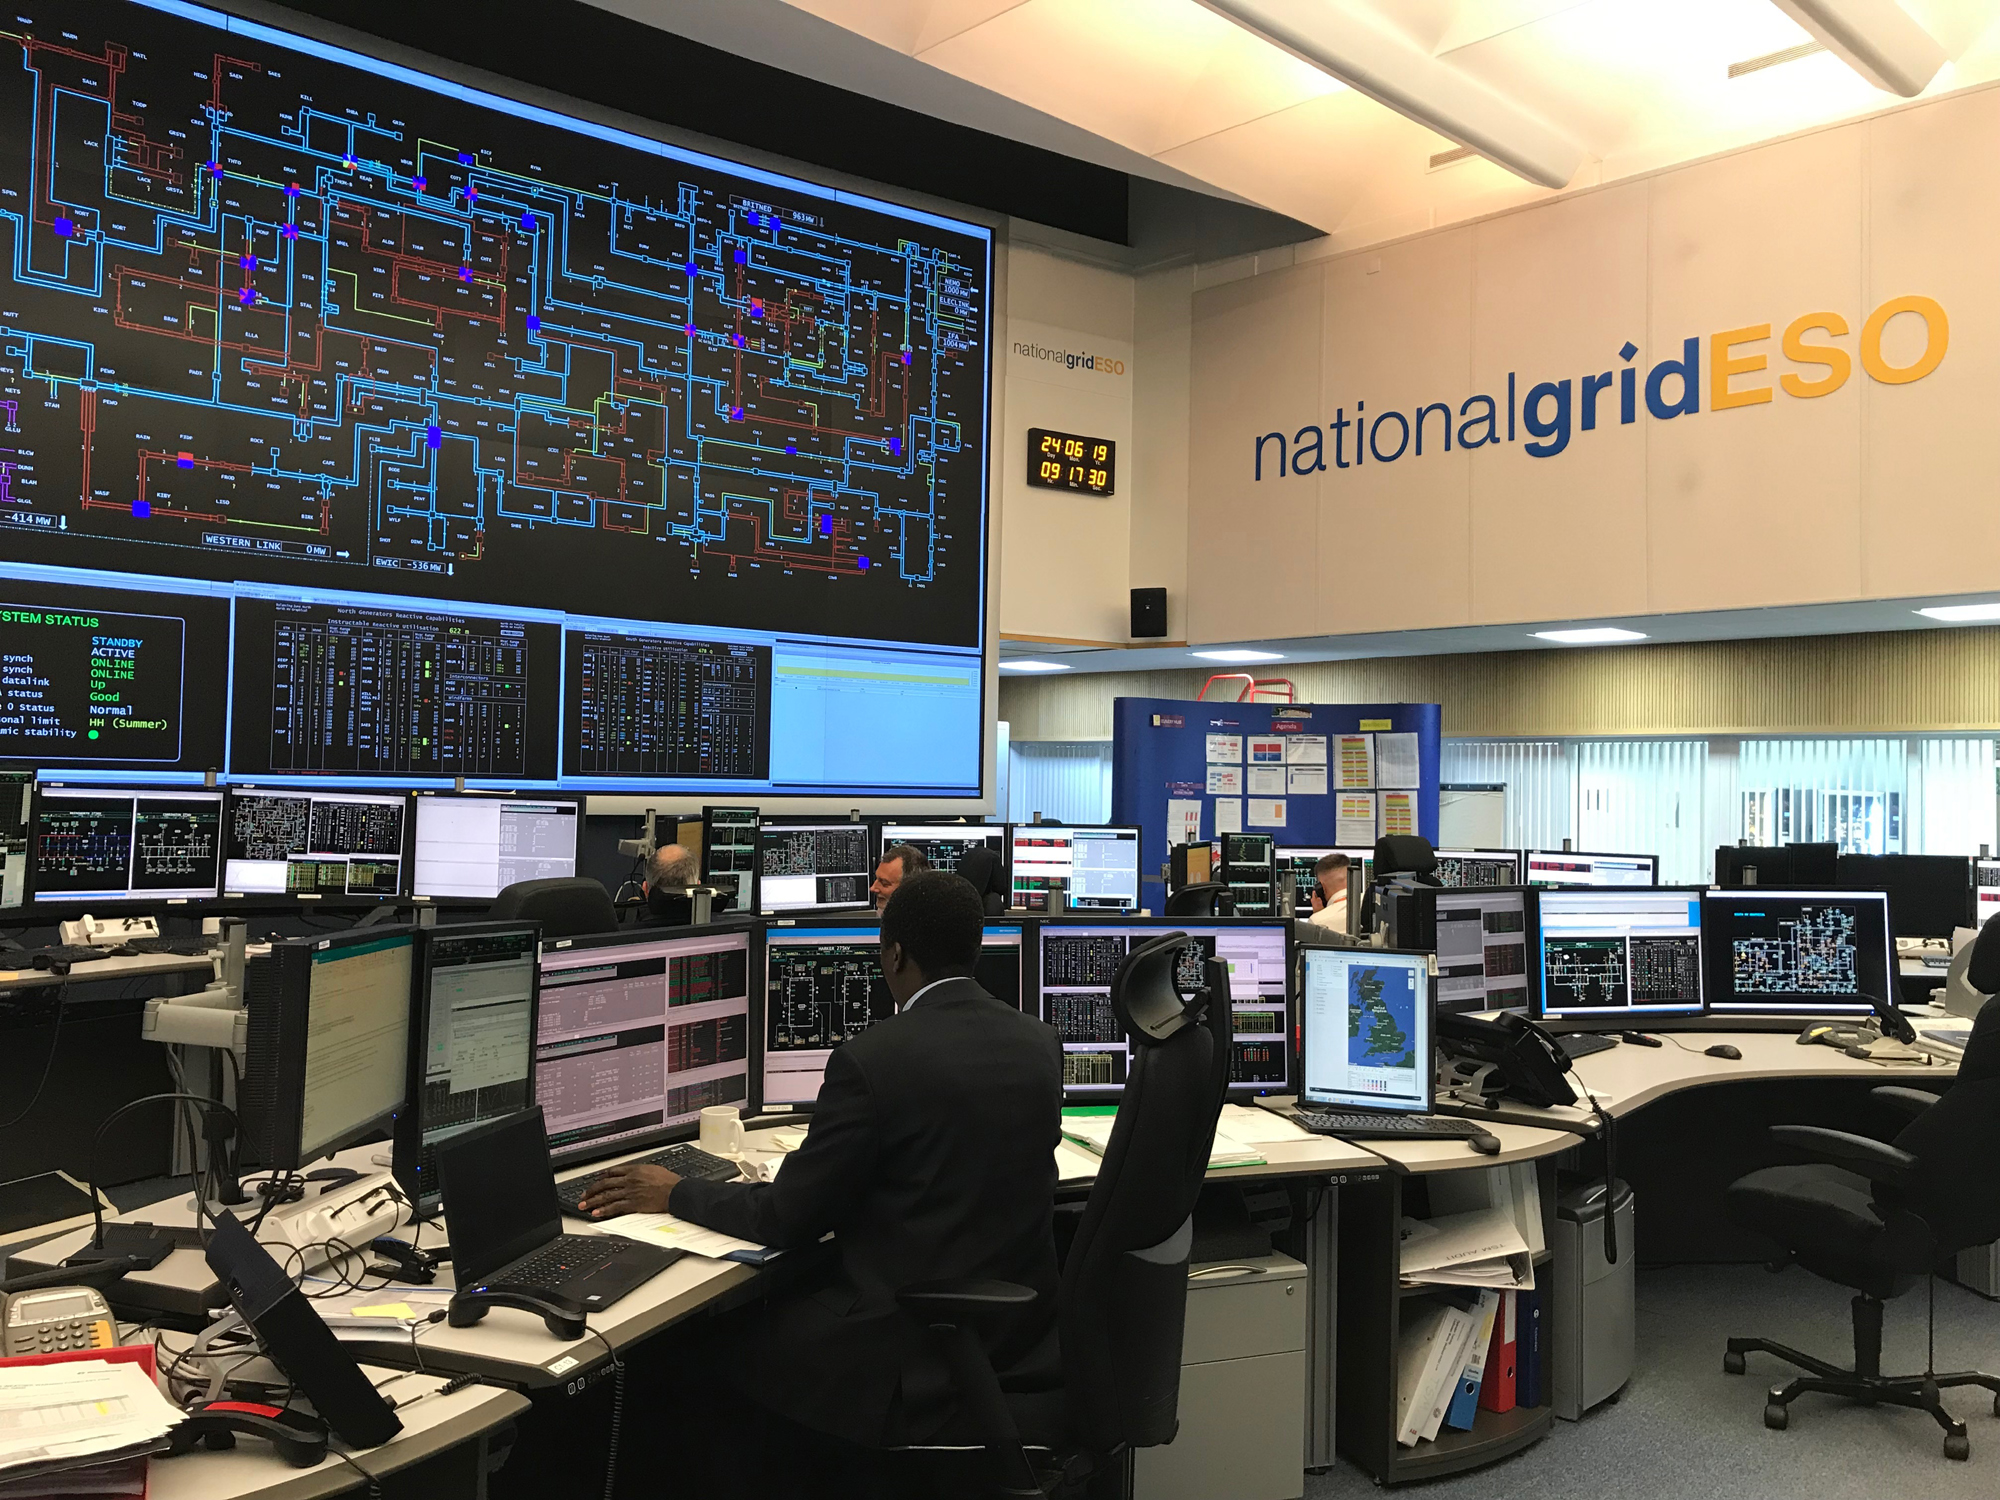 Working in the National Grid ESO Control Room